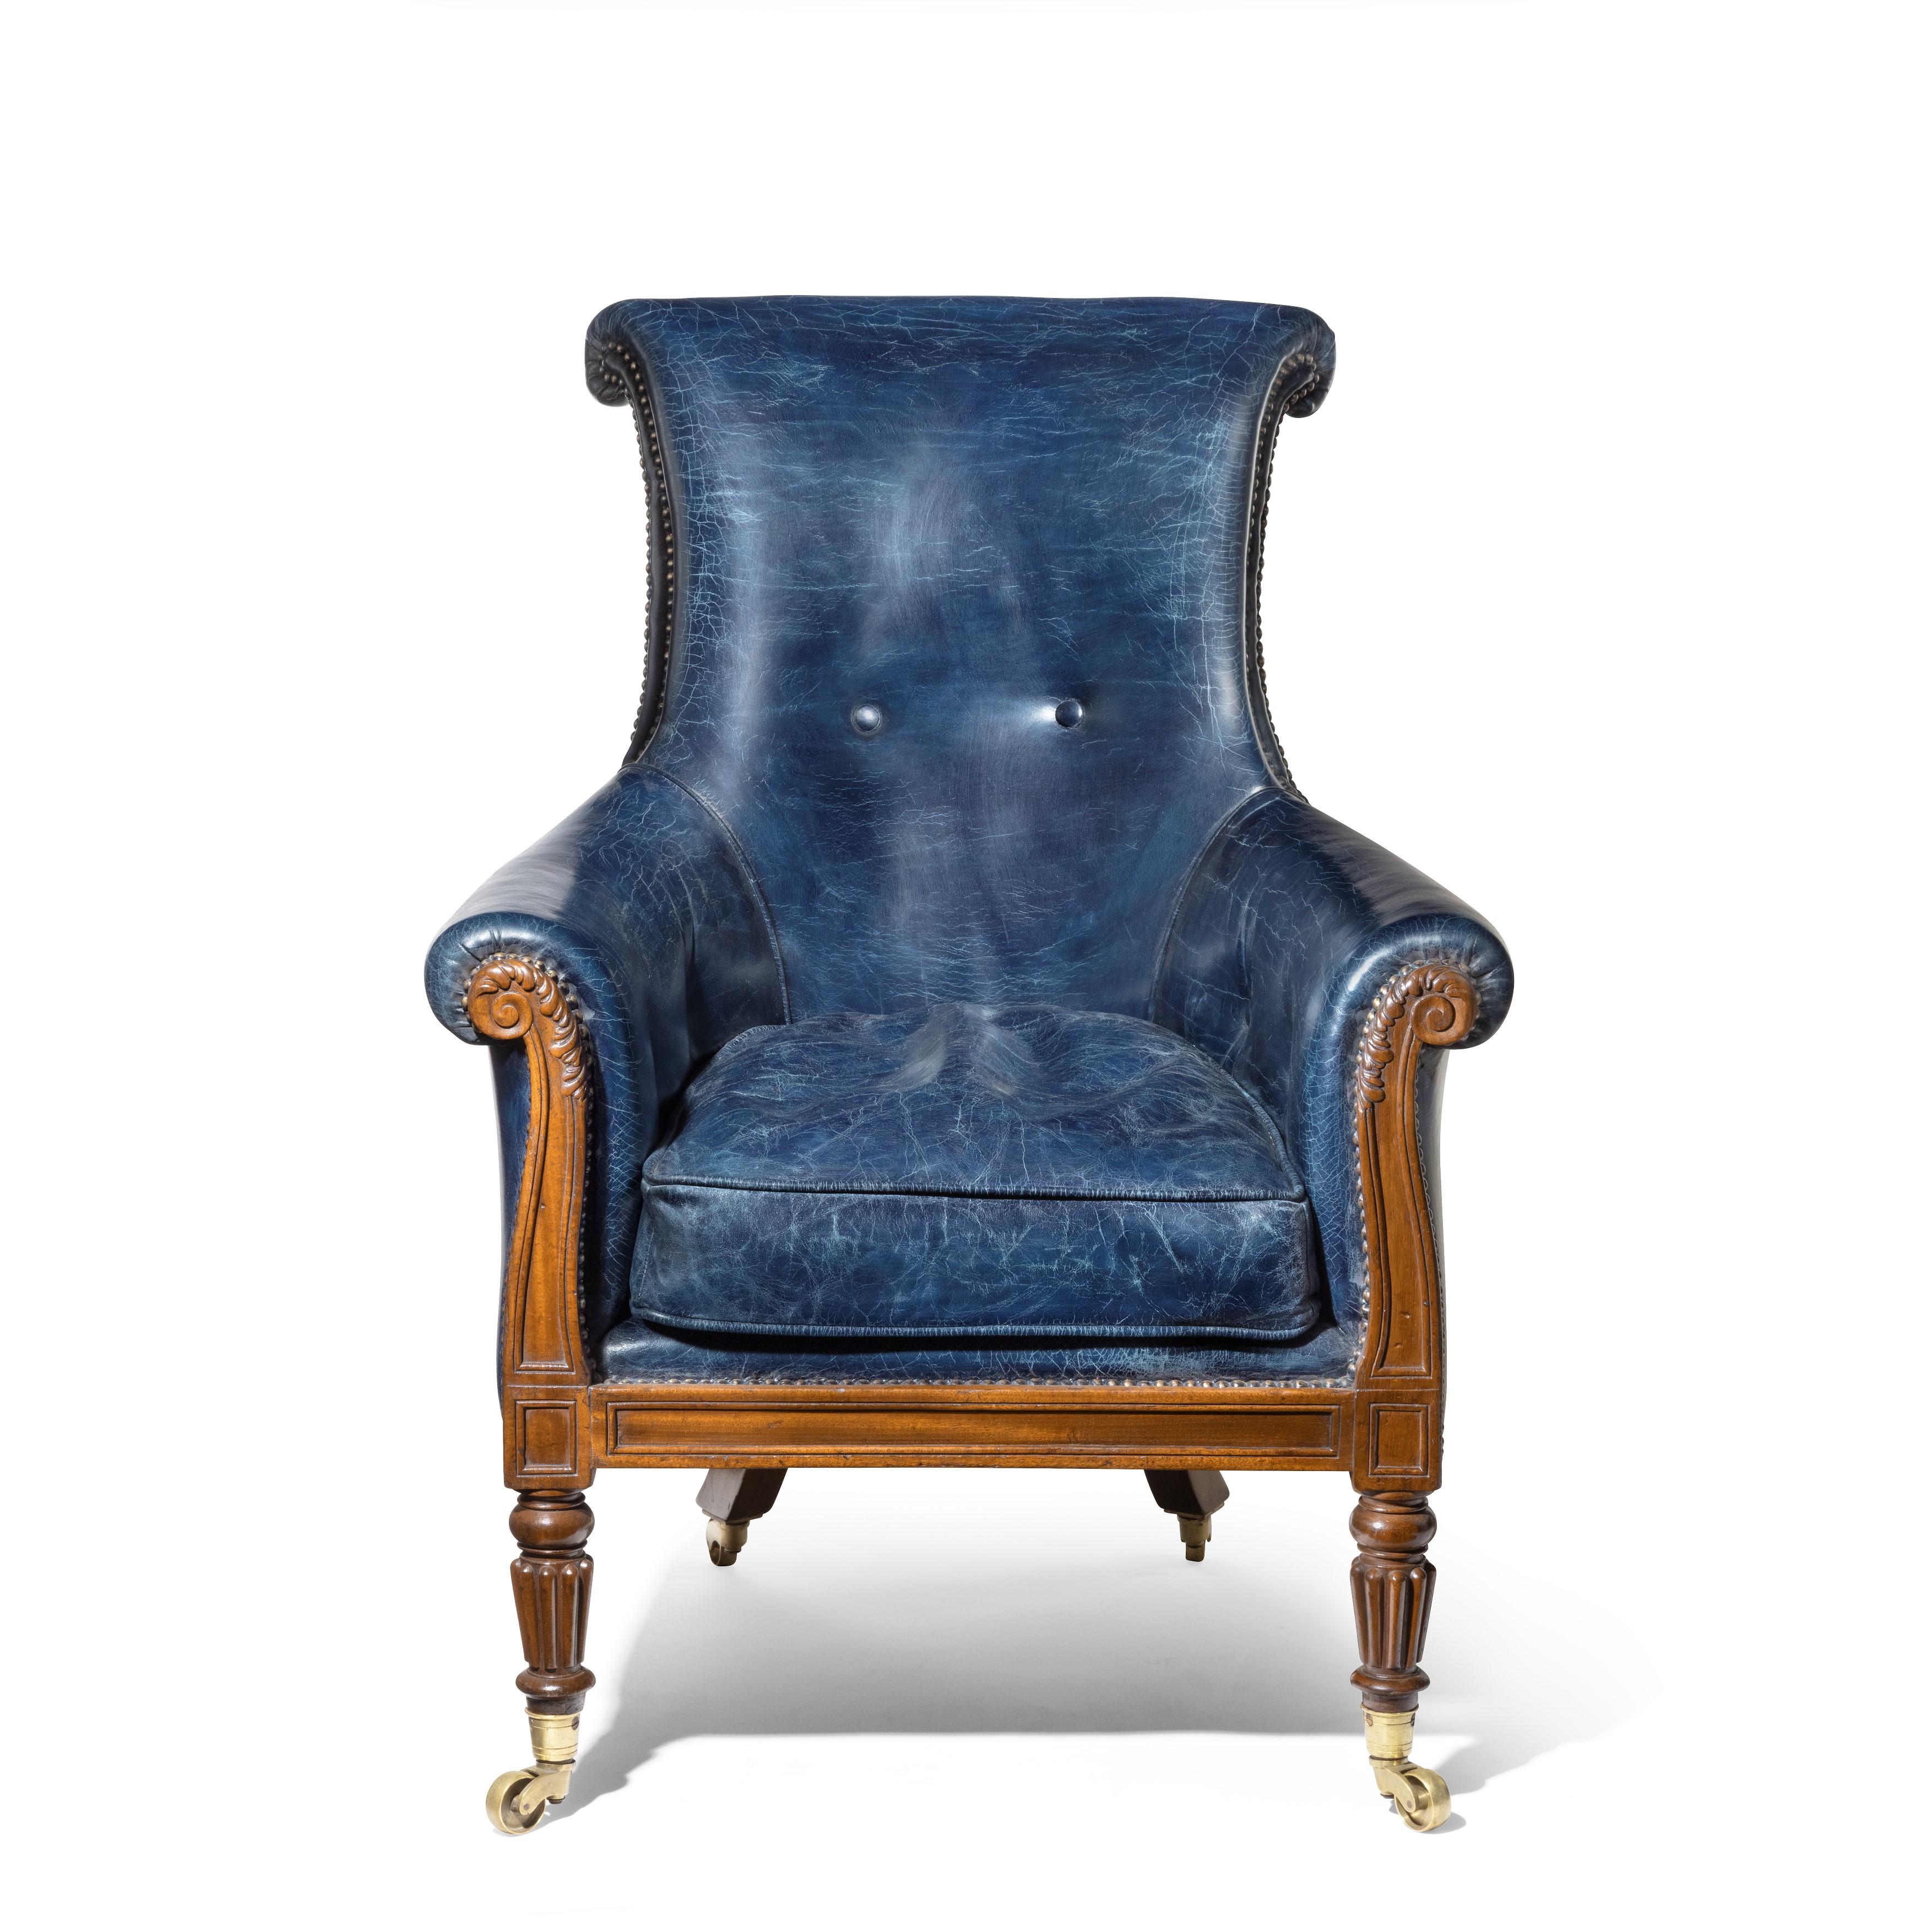 A Regency mahogany library chair by Gillows, the slender, shaped scroll back integral with the acanthus-carved scroll arms, the panelled seat rail set upon turned and reeded front legs and outswept back legs with similar decoration, all with brass